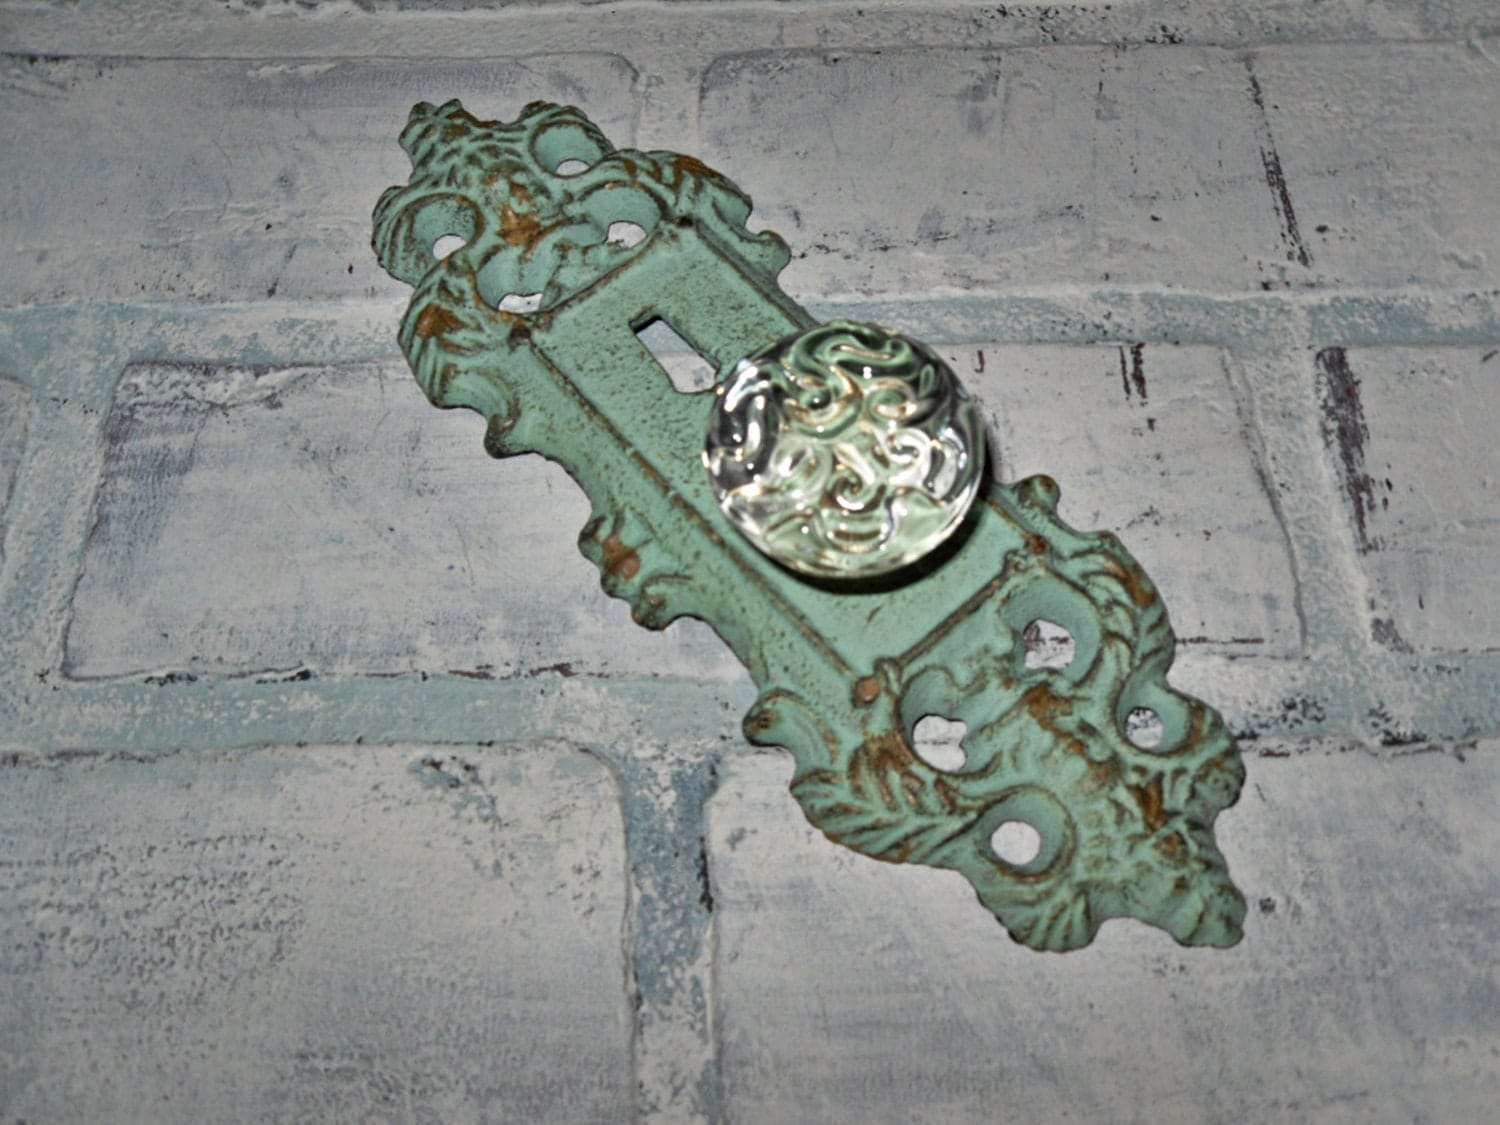 Ornate Decorative Cast Iron Door Plate with Glass by Theshabbyshak